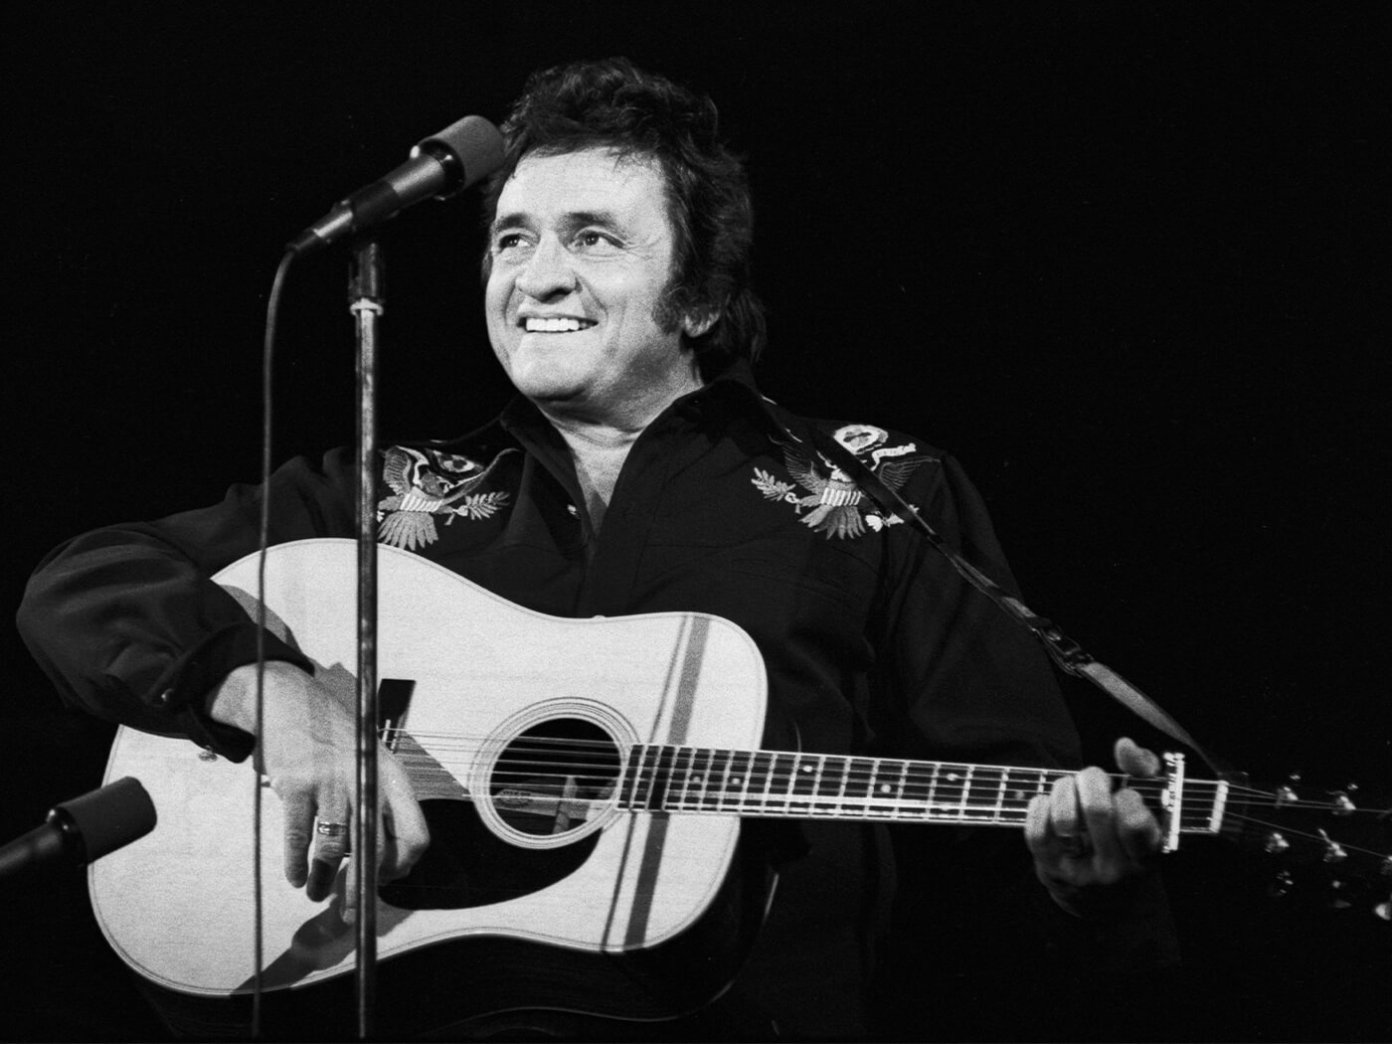 An unearthed Johnny Cash live show from ‘73 to be released by Third Man